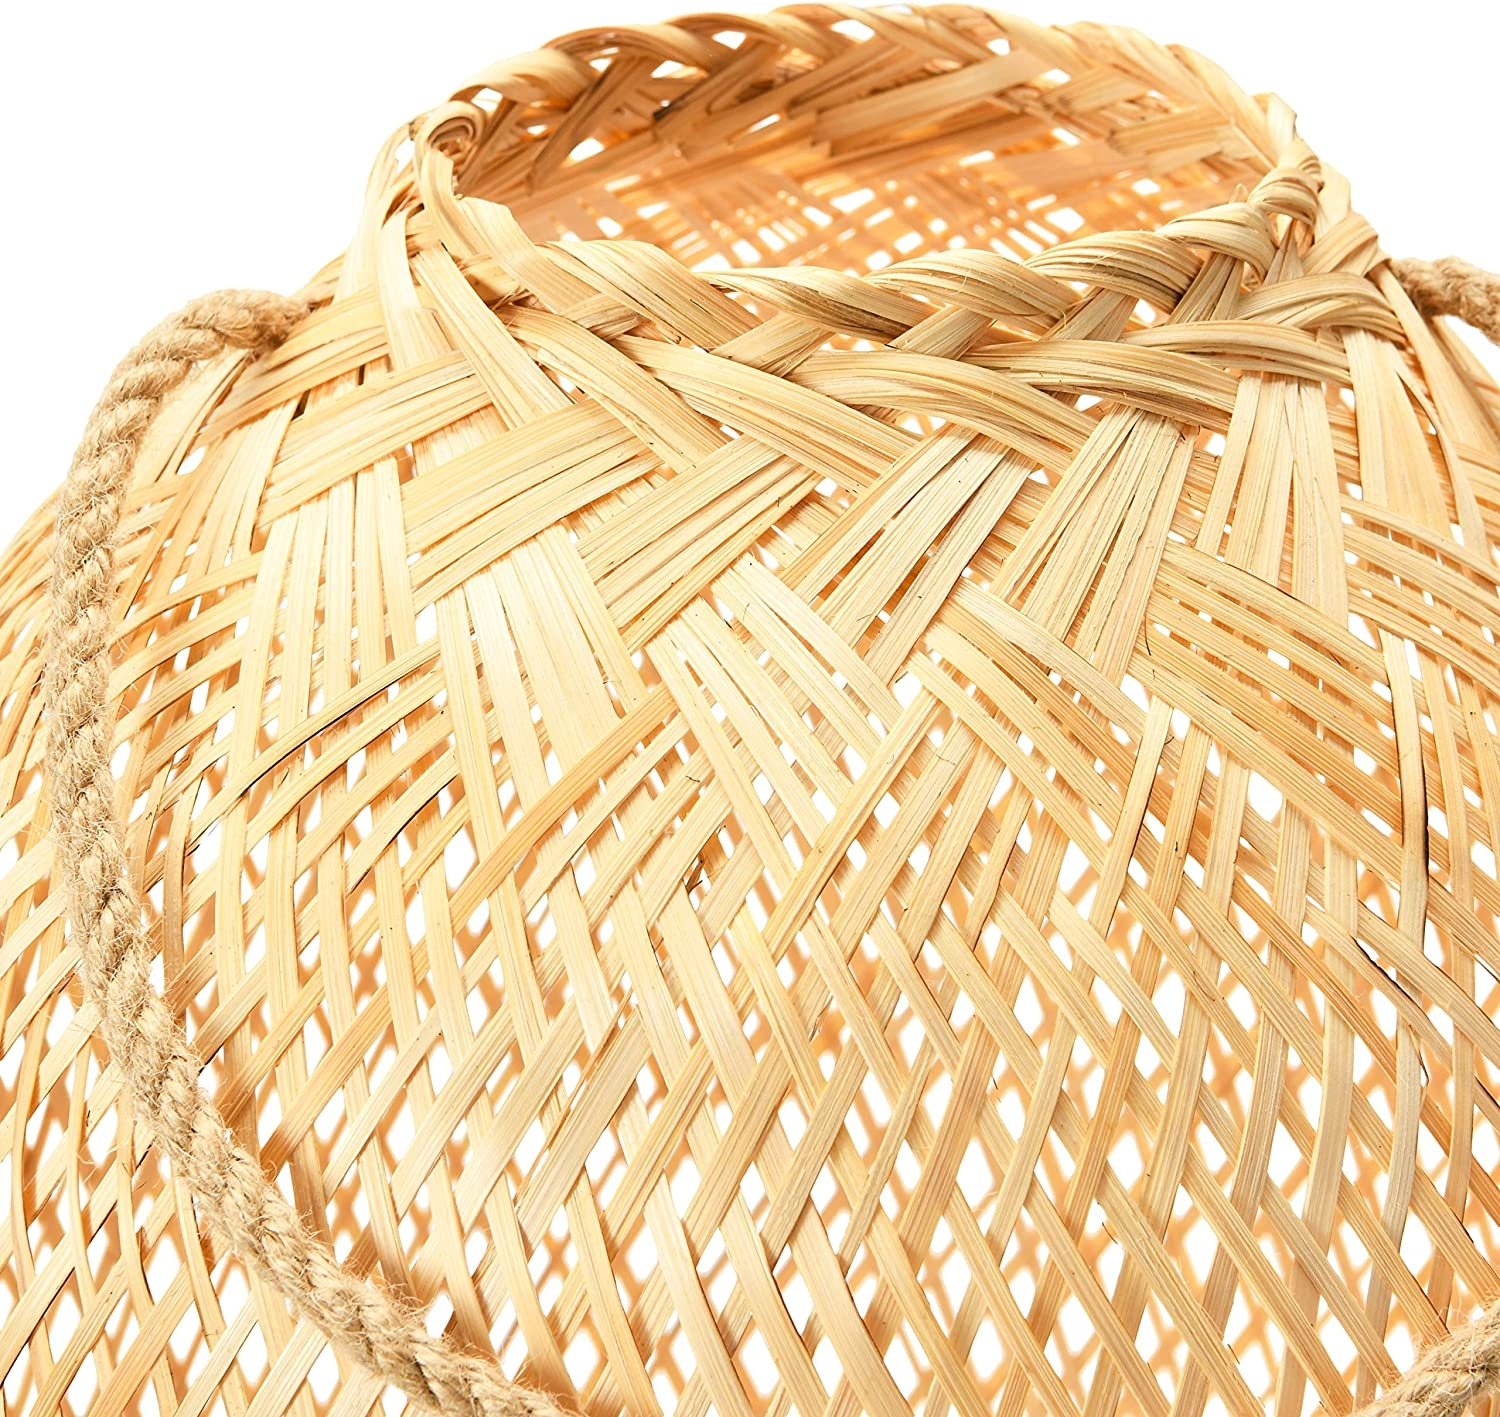 Handwoven Bamboo Lantern with Jute Handle & Glass Insert, Natural, Tall - Image 4